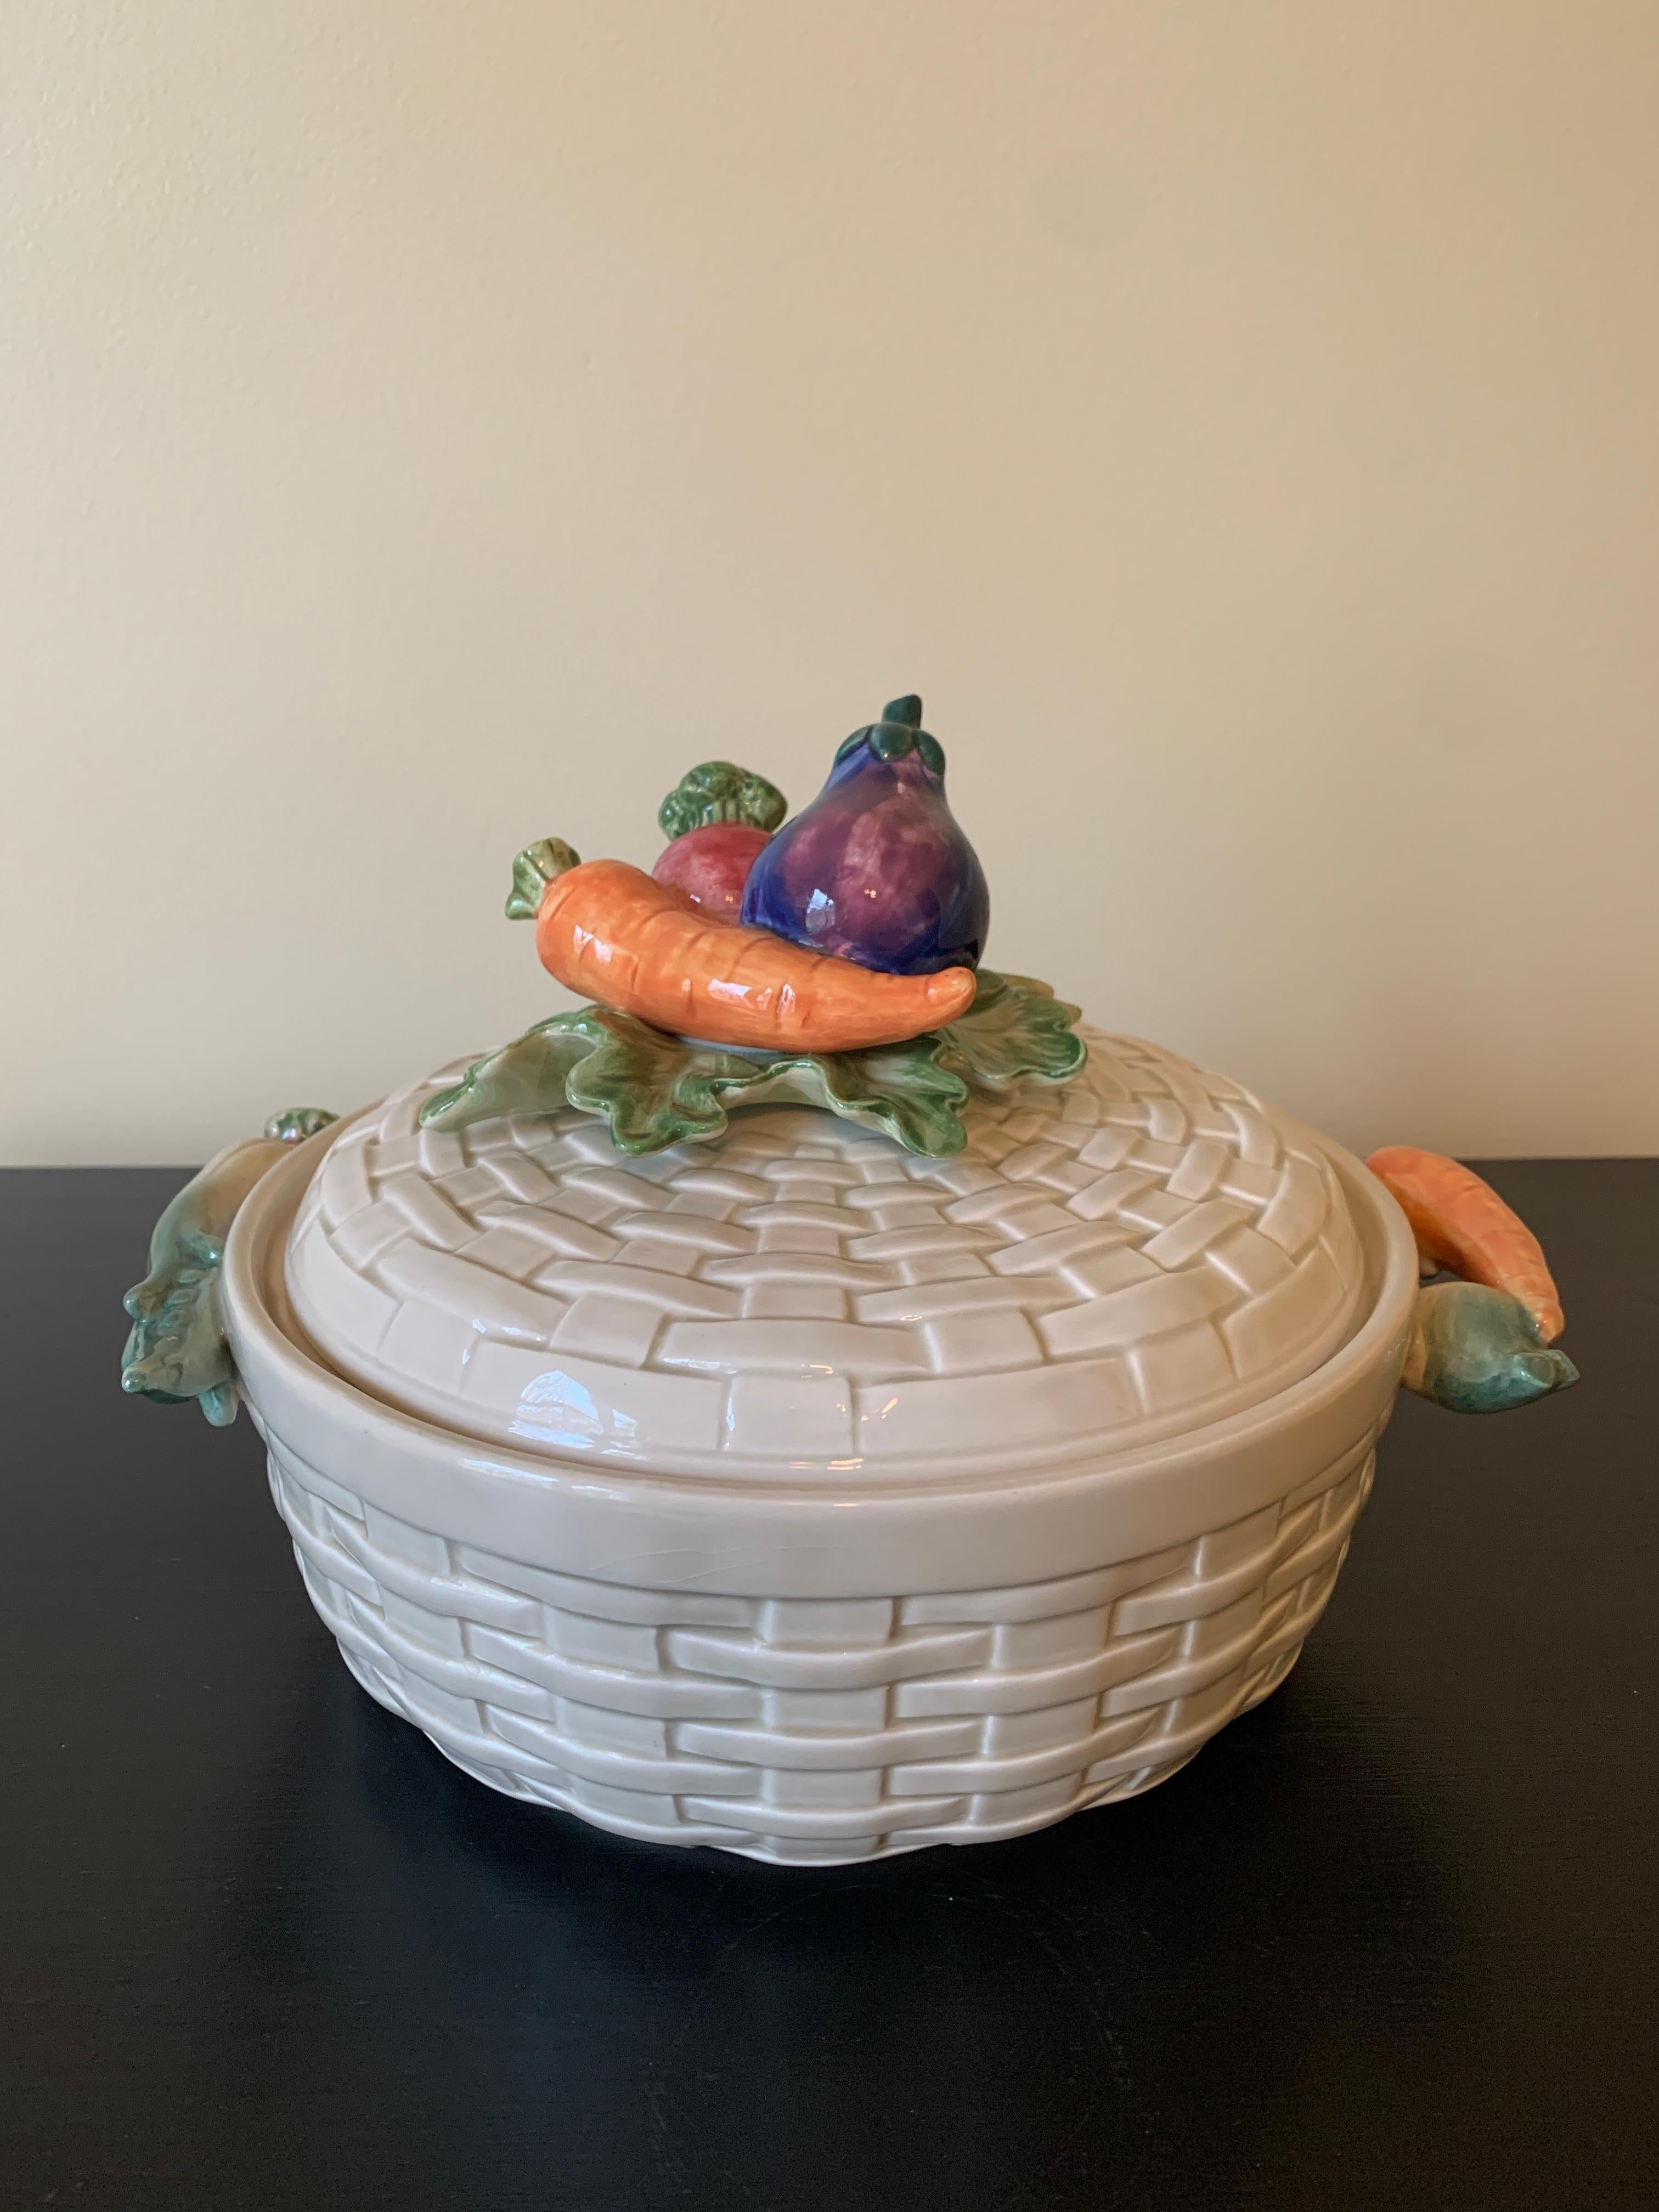 A stunning and rare majolica ceramic trompe l'Oeil covered dish or casserole in the form of a woven basket with various vegetables as the handles and on the lid.

By Fitz & Floyd

Circa 1980s

Measures: 10.75